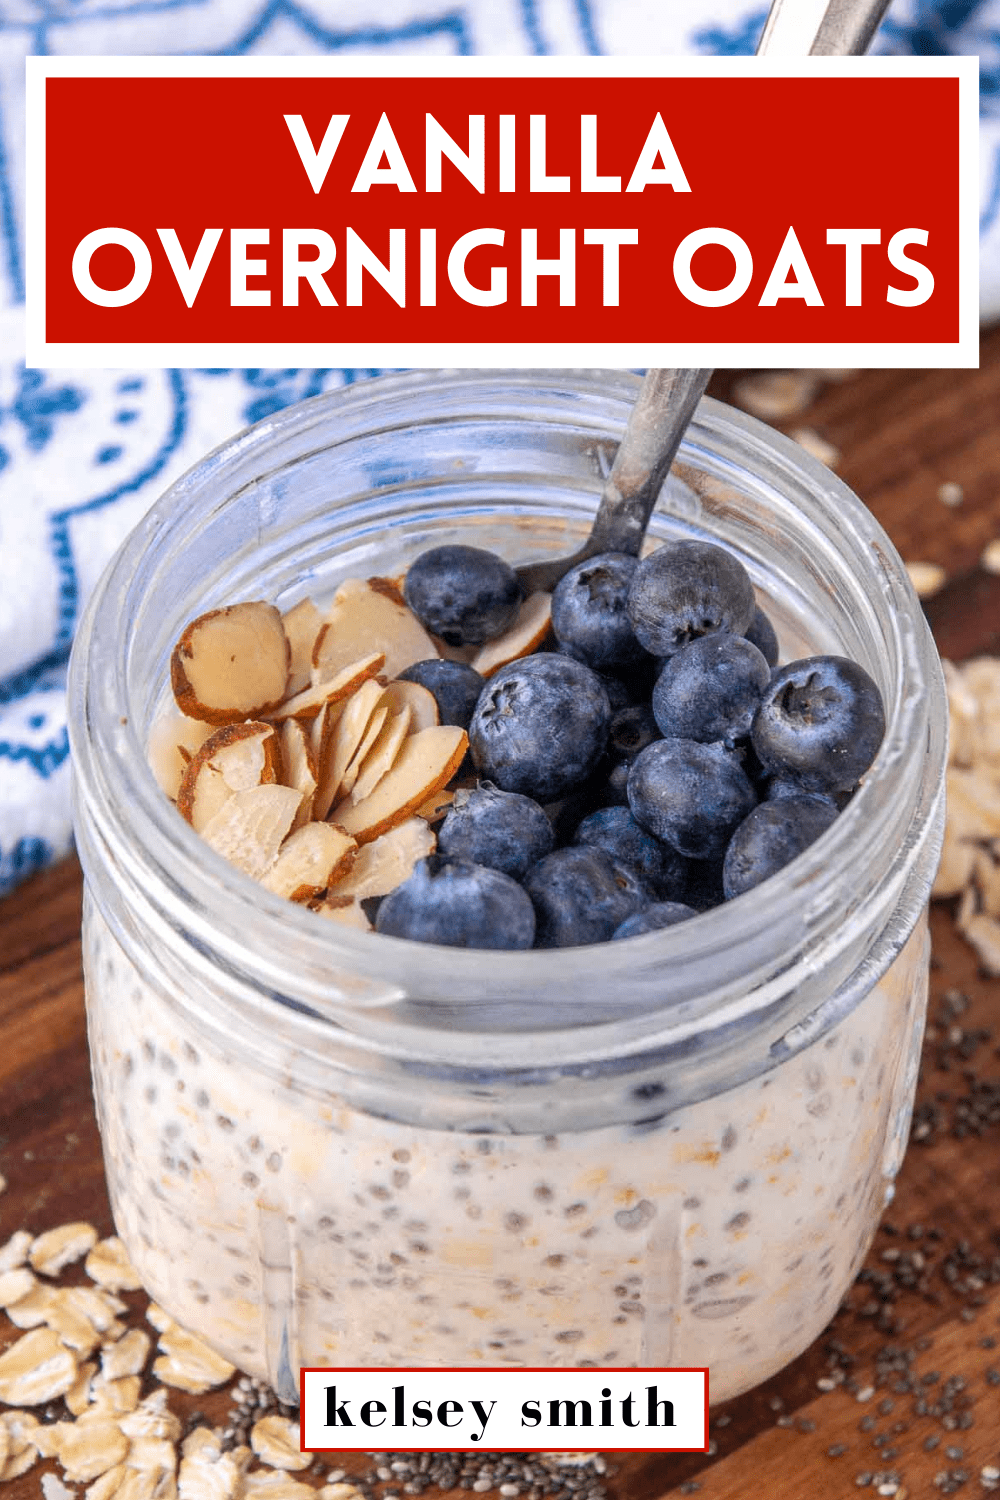 Vanilla overnight oats in a 12 ounce Mason jar topped with blueberries and sliced almonds. Text at the top reads Vanilla Overnight Oats.